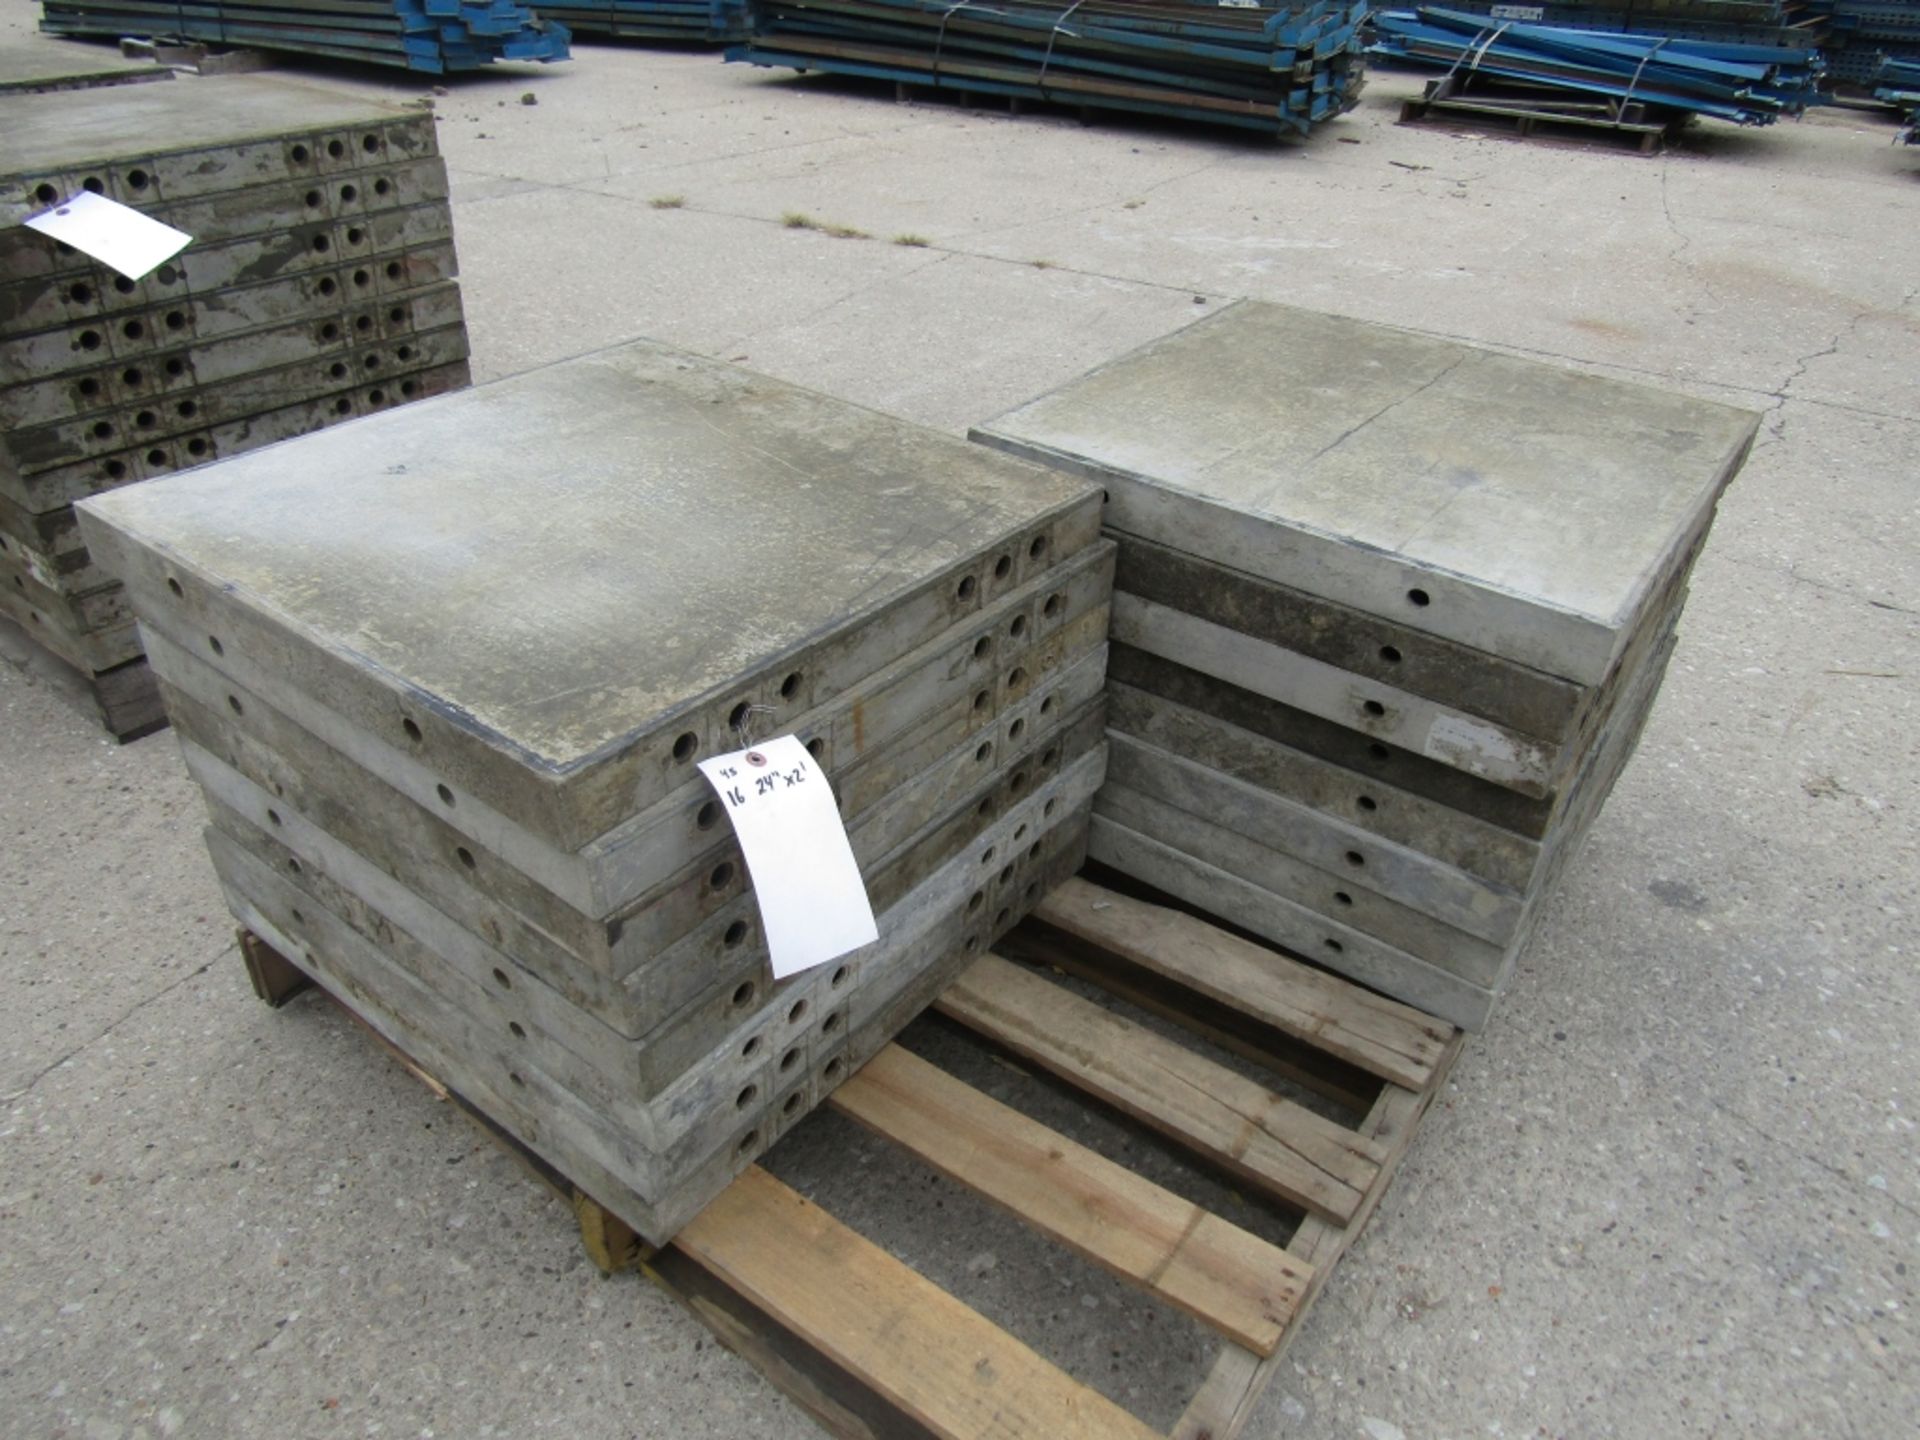 (16) 24" x 2' Western Elite Concrete Forms, Smooth 6-12 Hole Pattern Triple Punch/ Gasket, Located